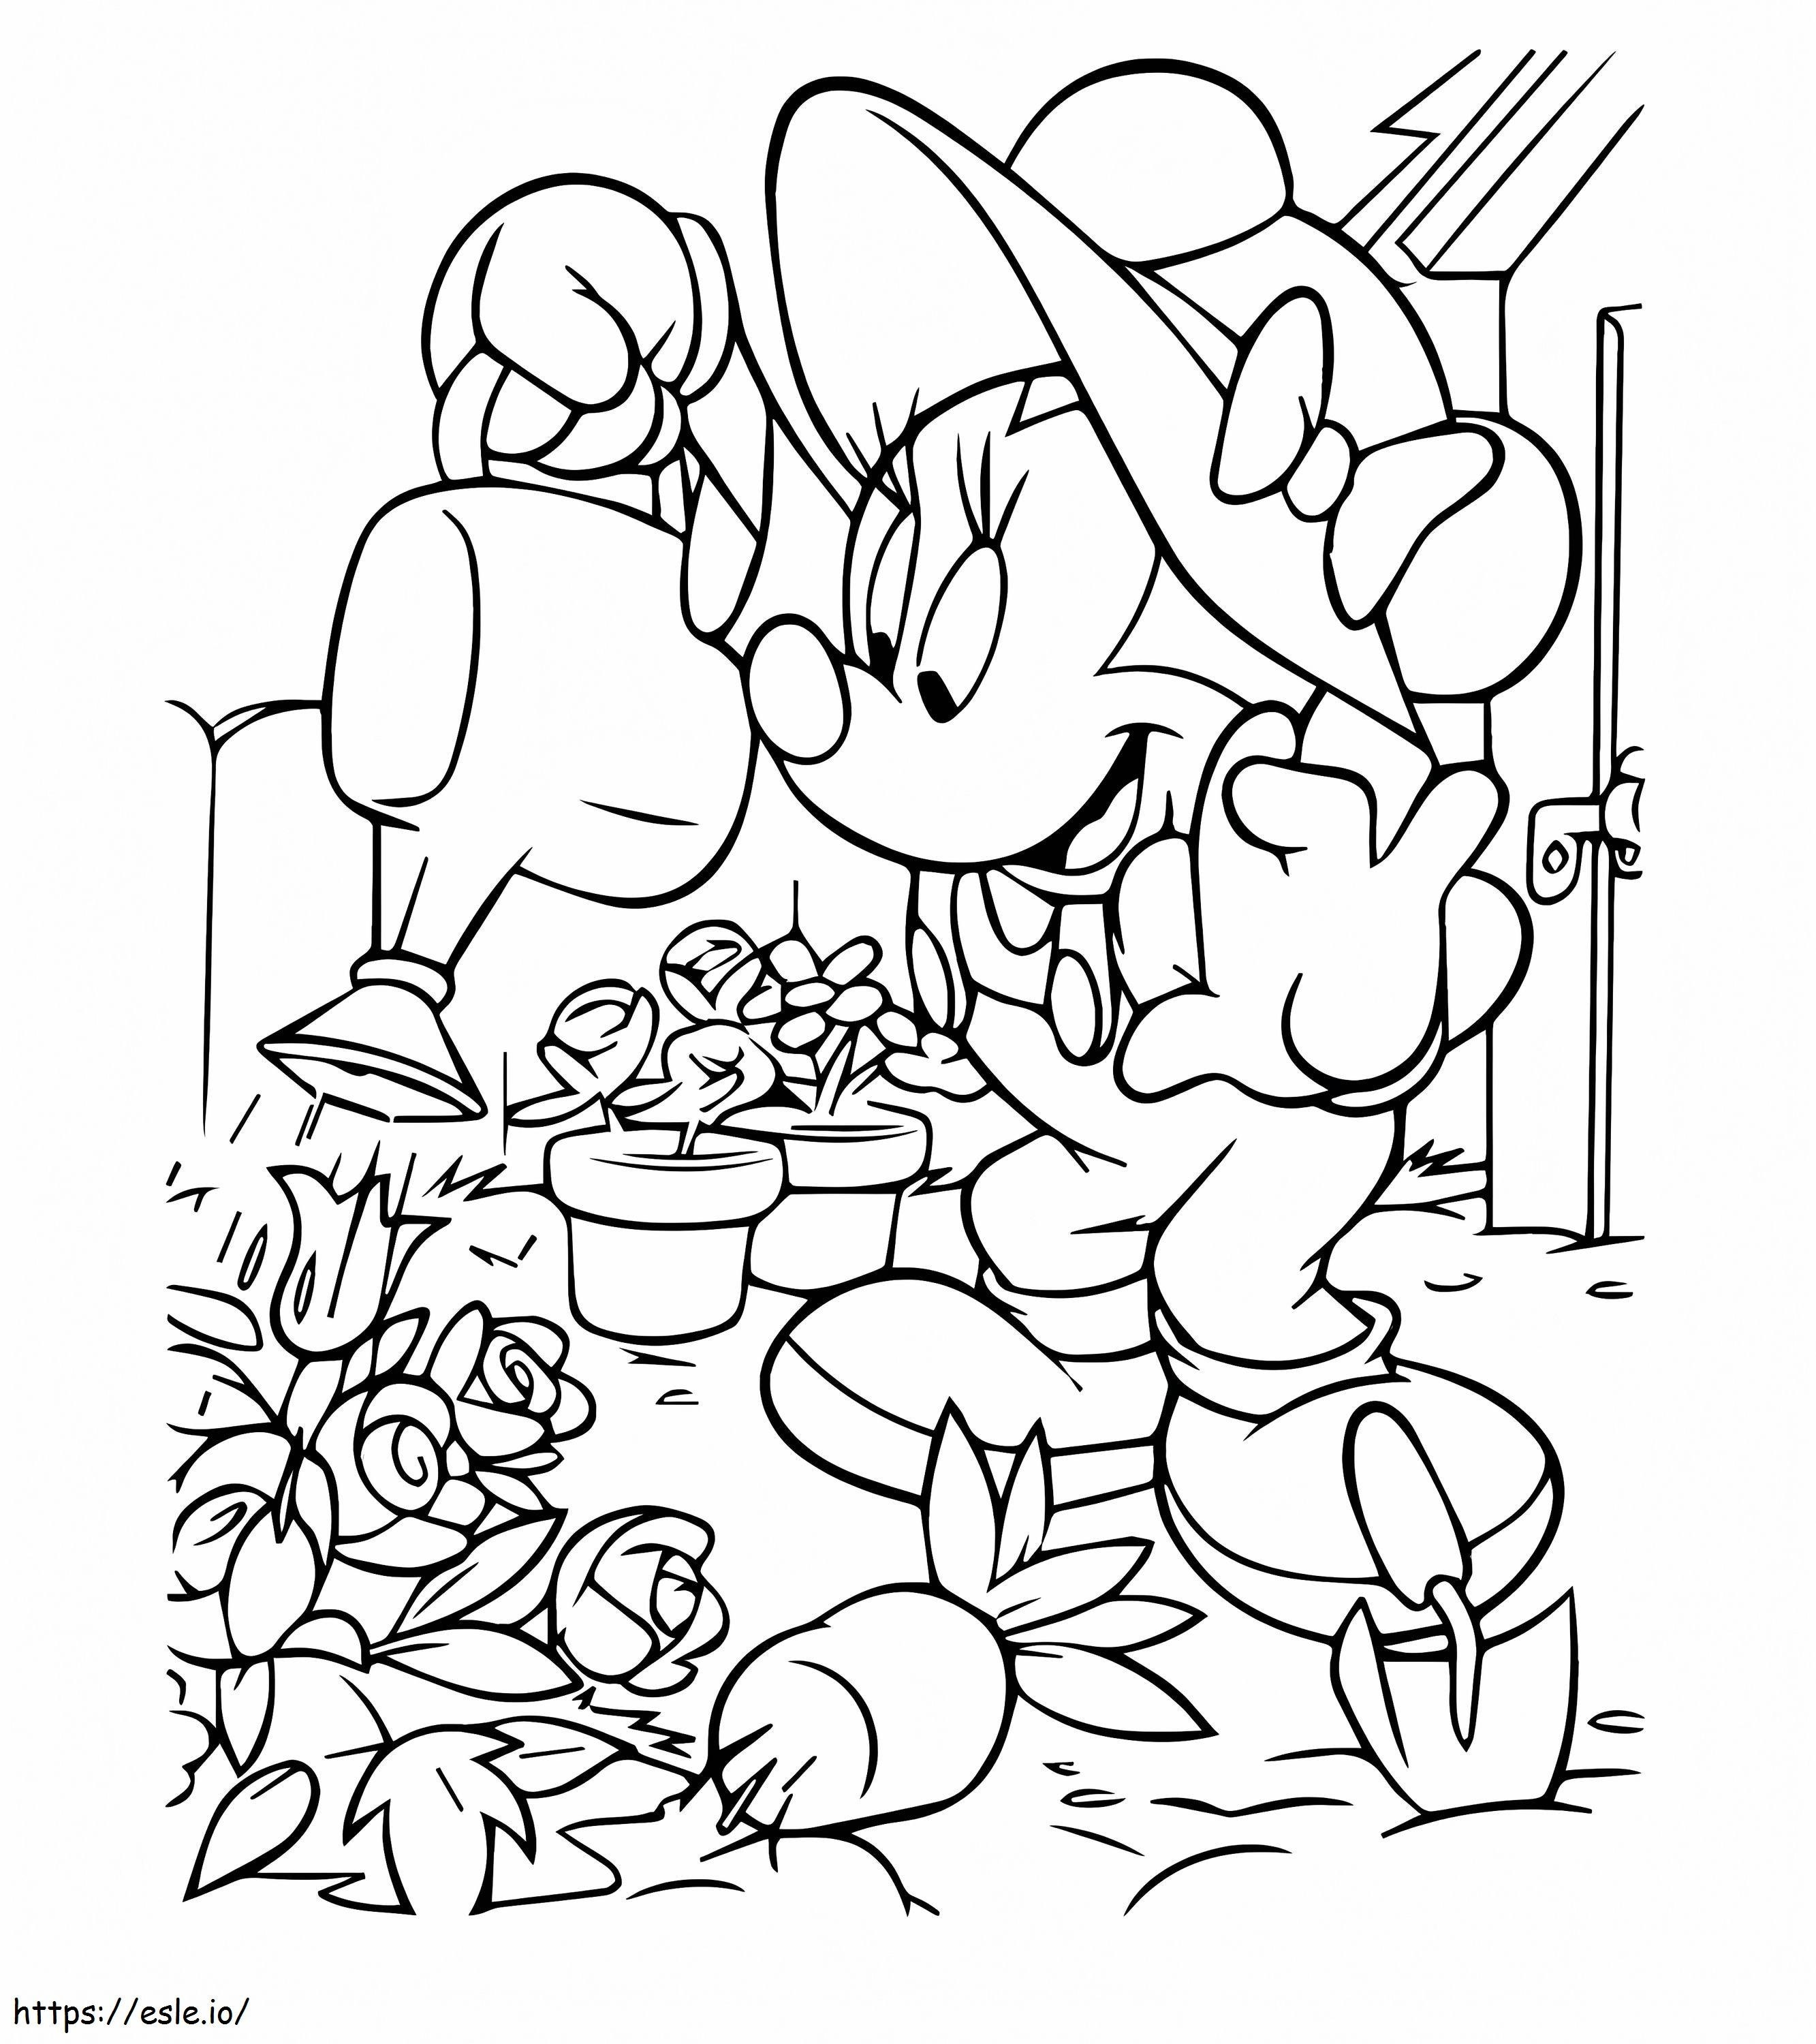 Minnie Mouse Watering The Plants coloring page